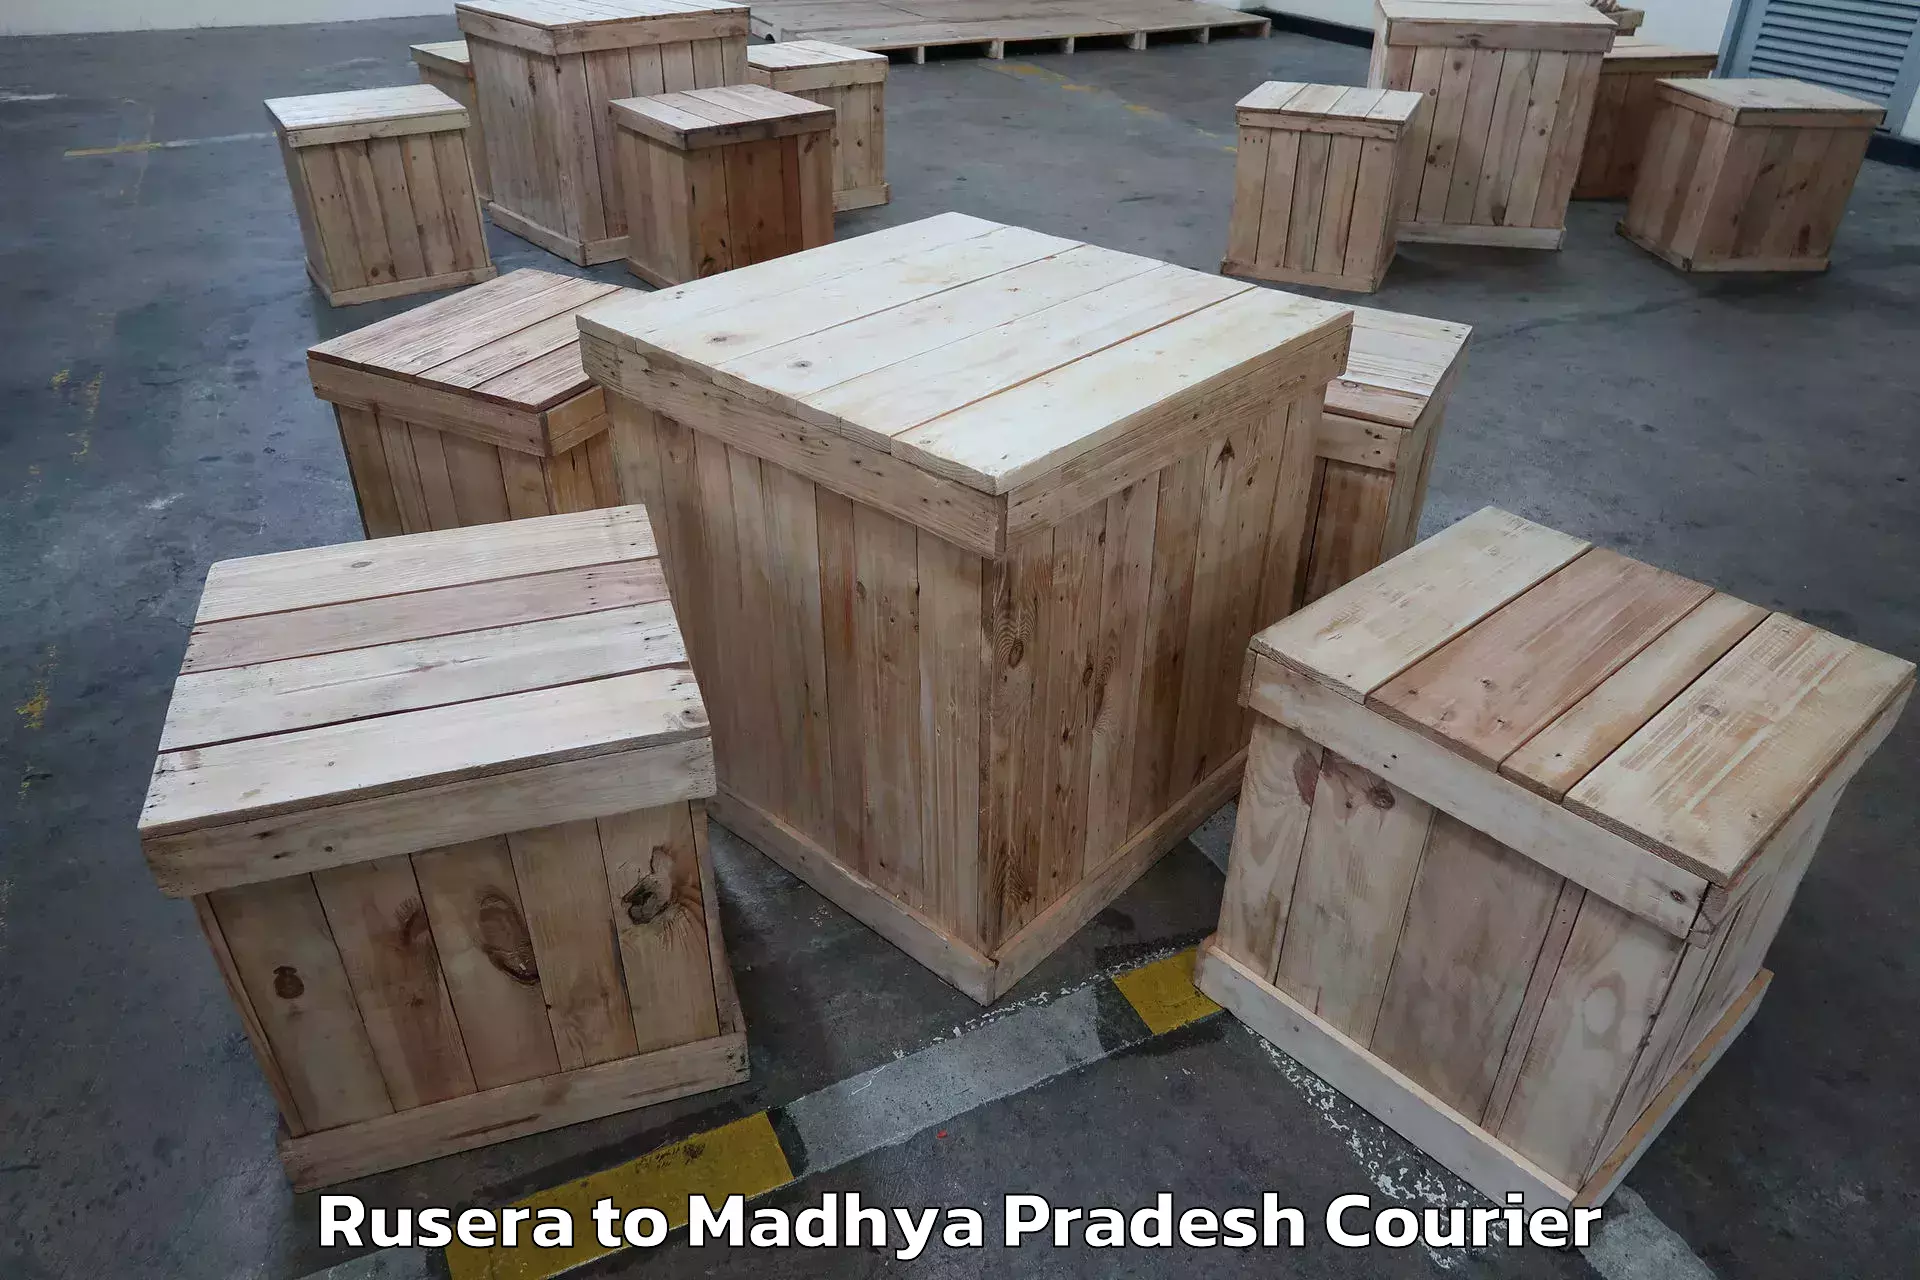 Furniture moving specialists Rusera to Gwalior